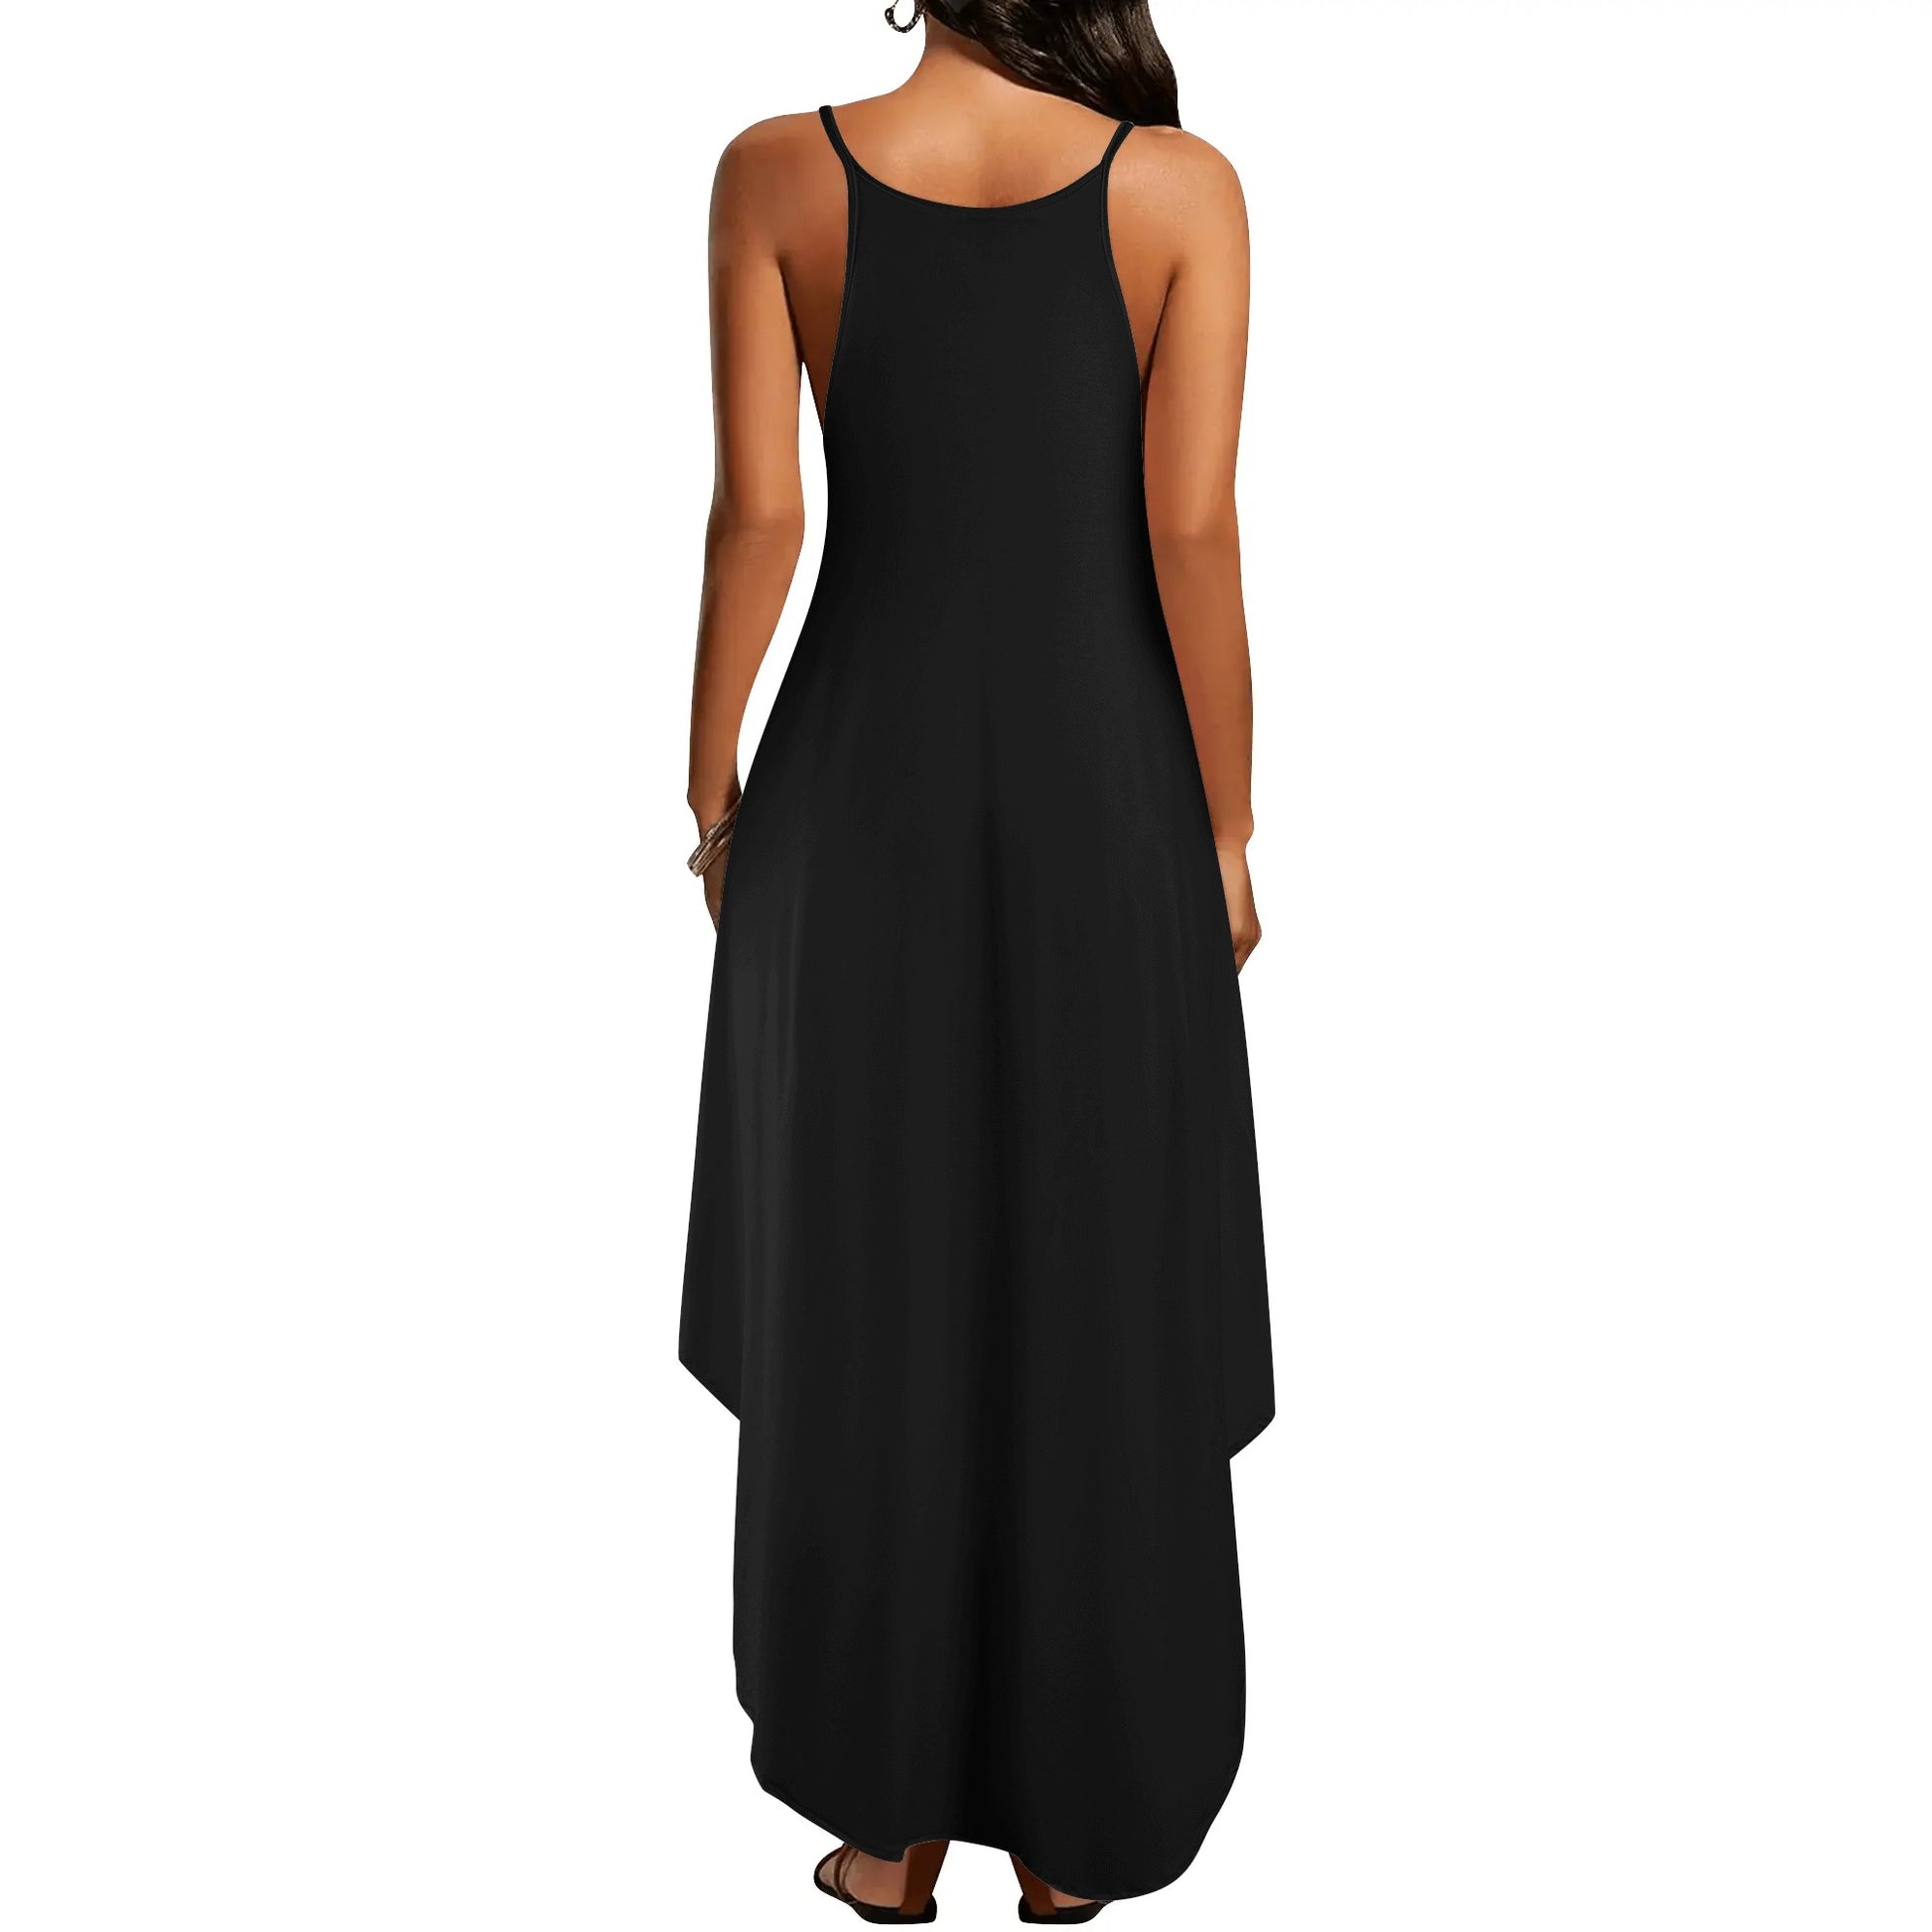 Child Of God I Serve The Only One Who Can Defeat Death Hell And The Grave Womens Christian Elegant Sleeveless Summer Maxi Dress popcustoms